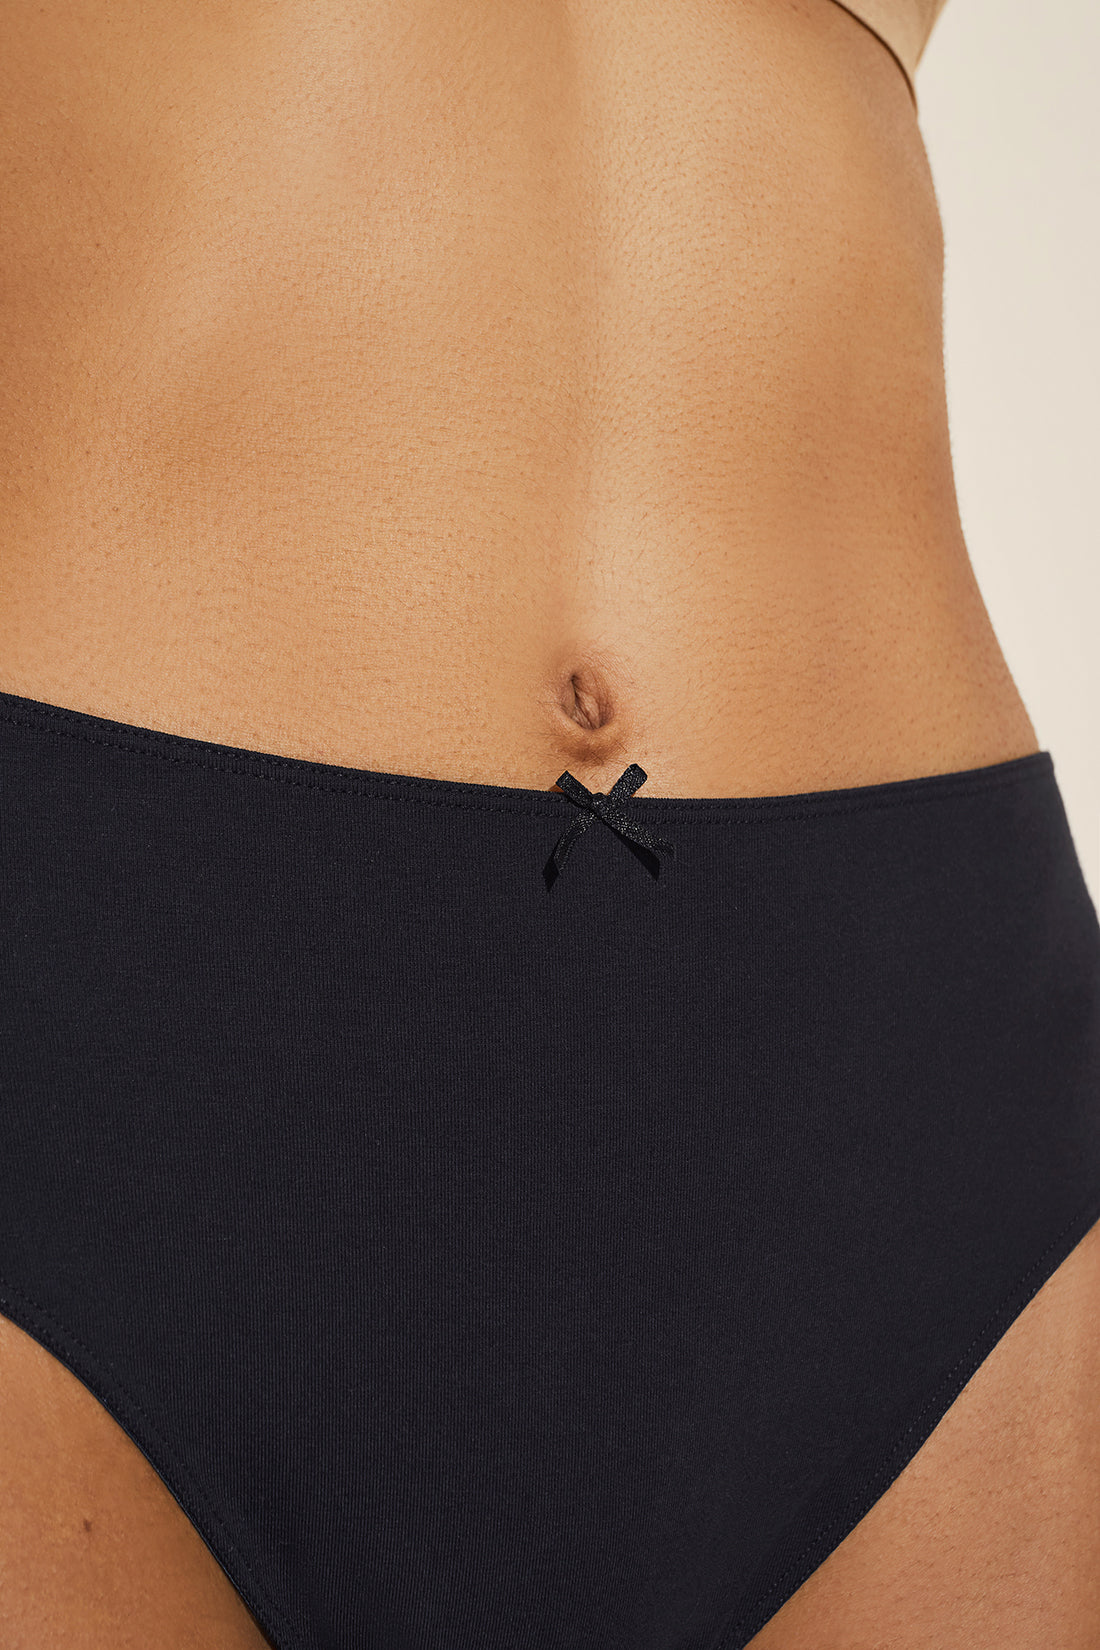 I'm Restocking My Underwear Drawer With These 8 Comfy Pairs That Start at  $2 Apiece